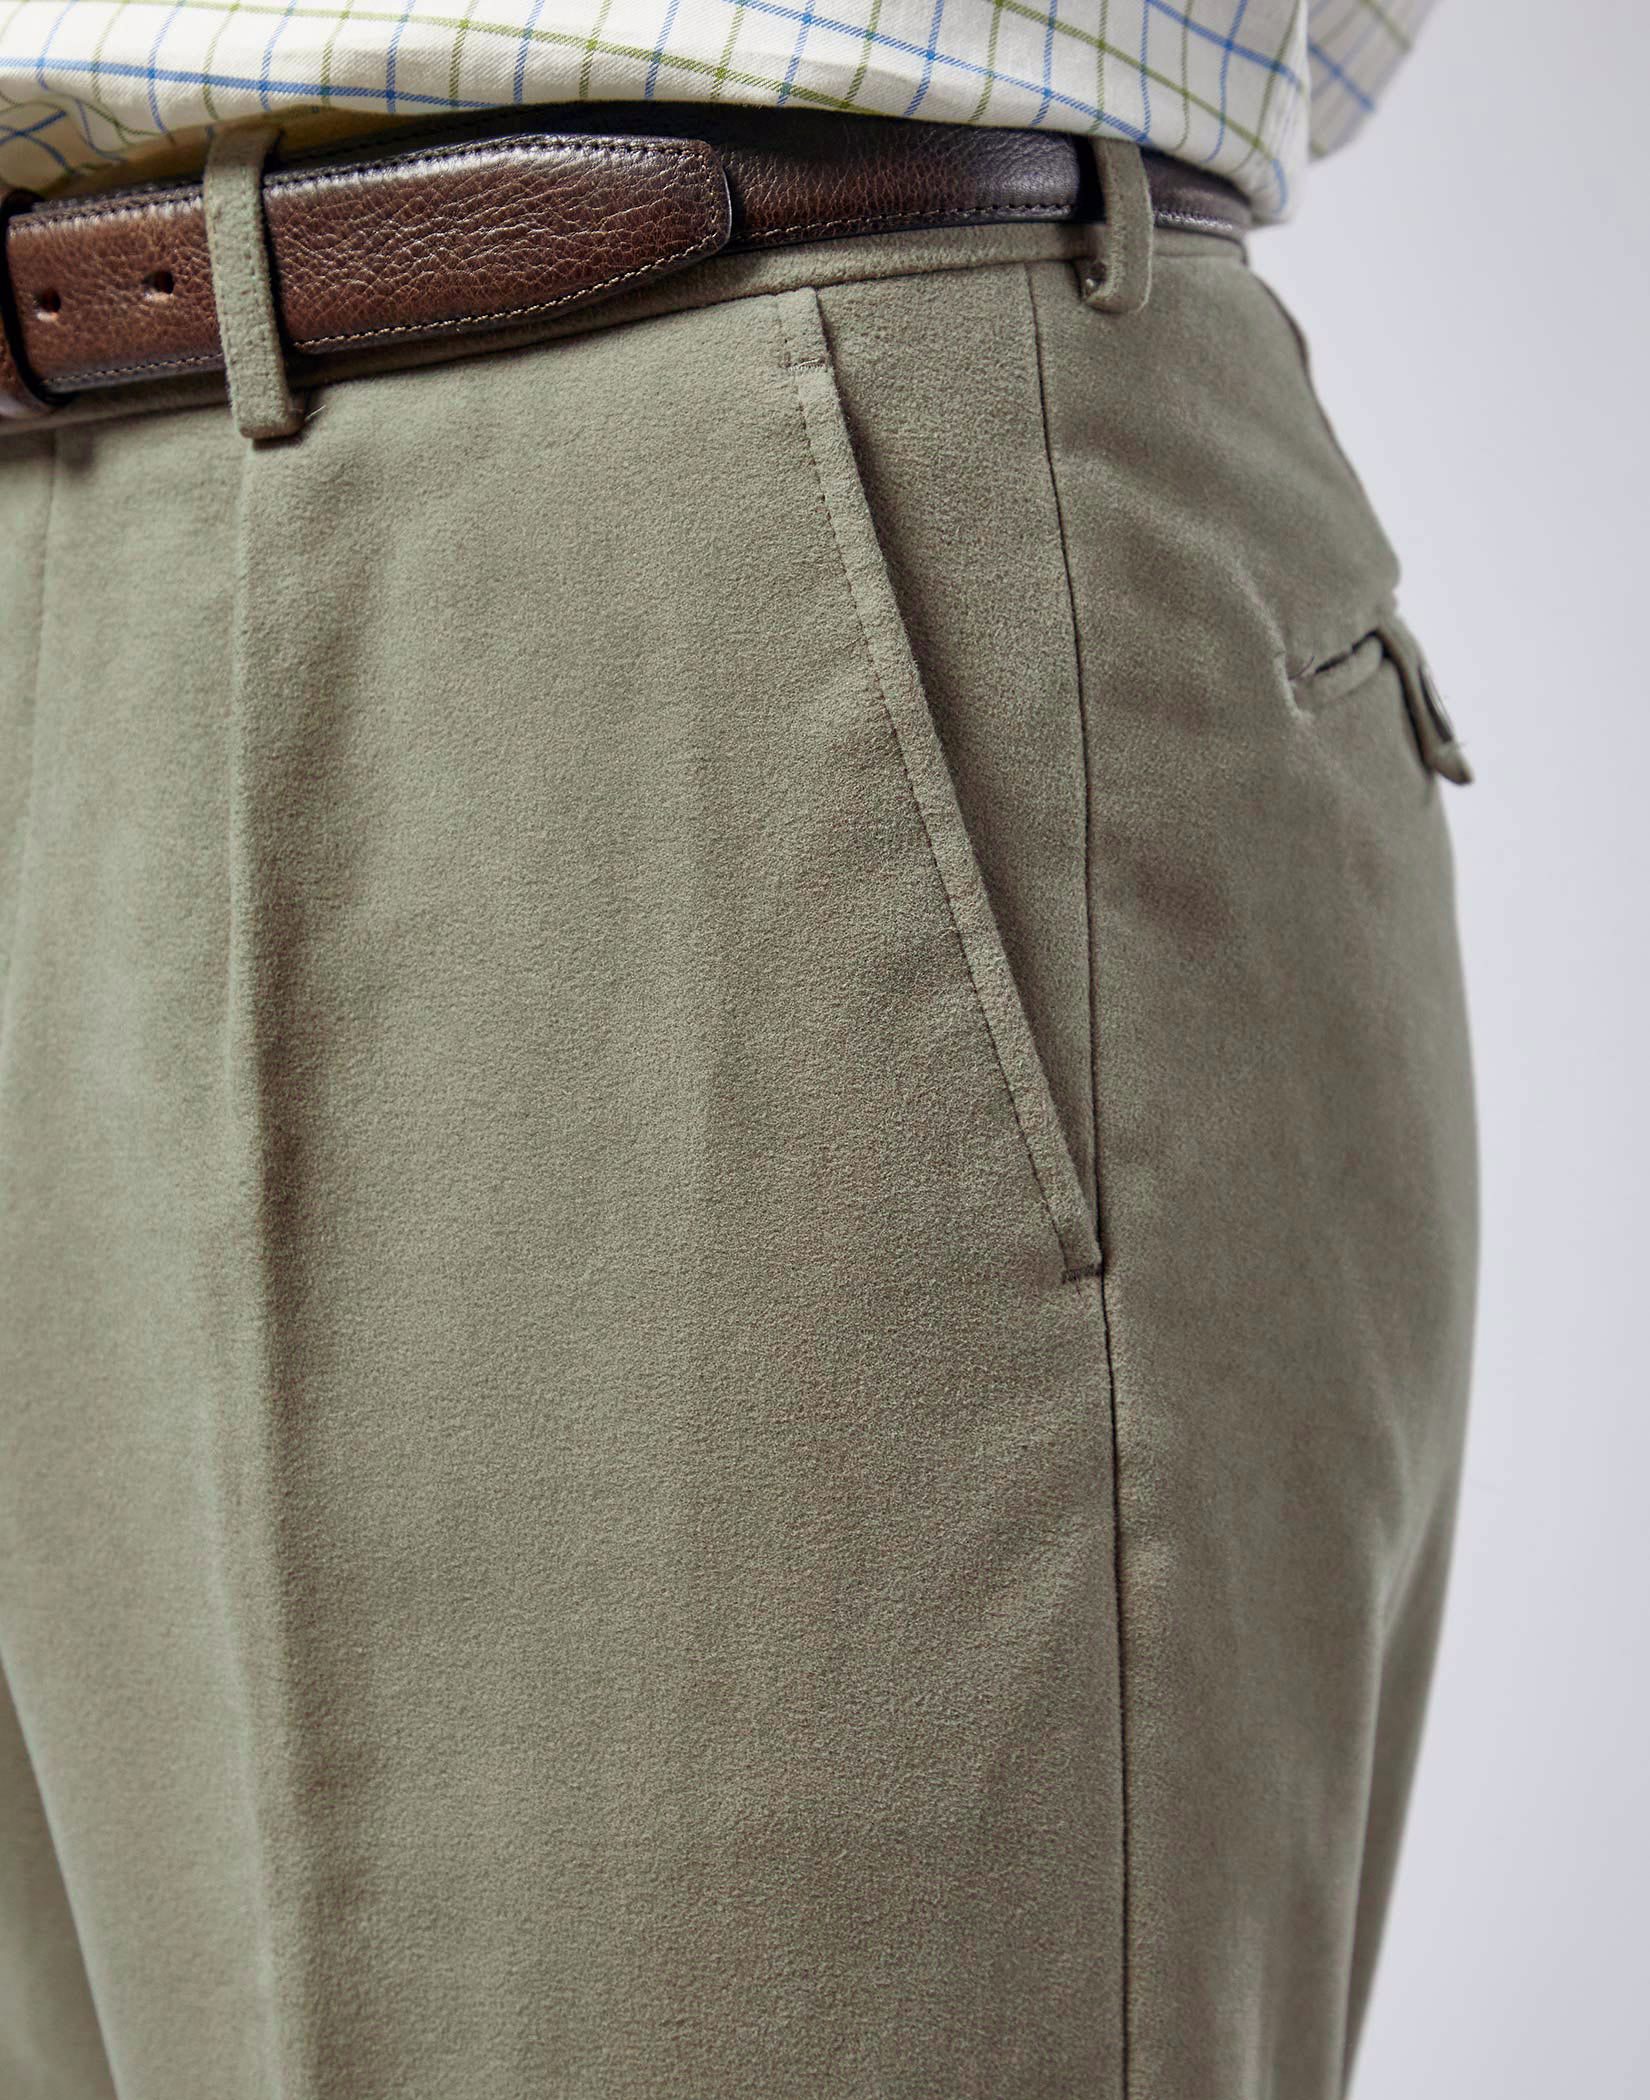 Discover 79+ green moleskin trousers best - in.cdgdbentre